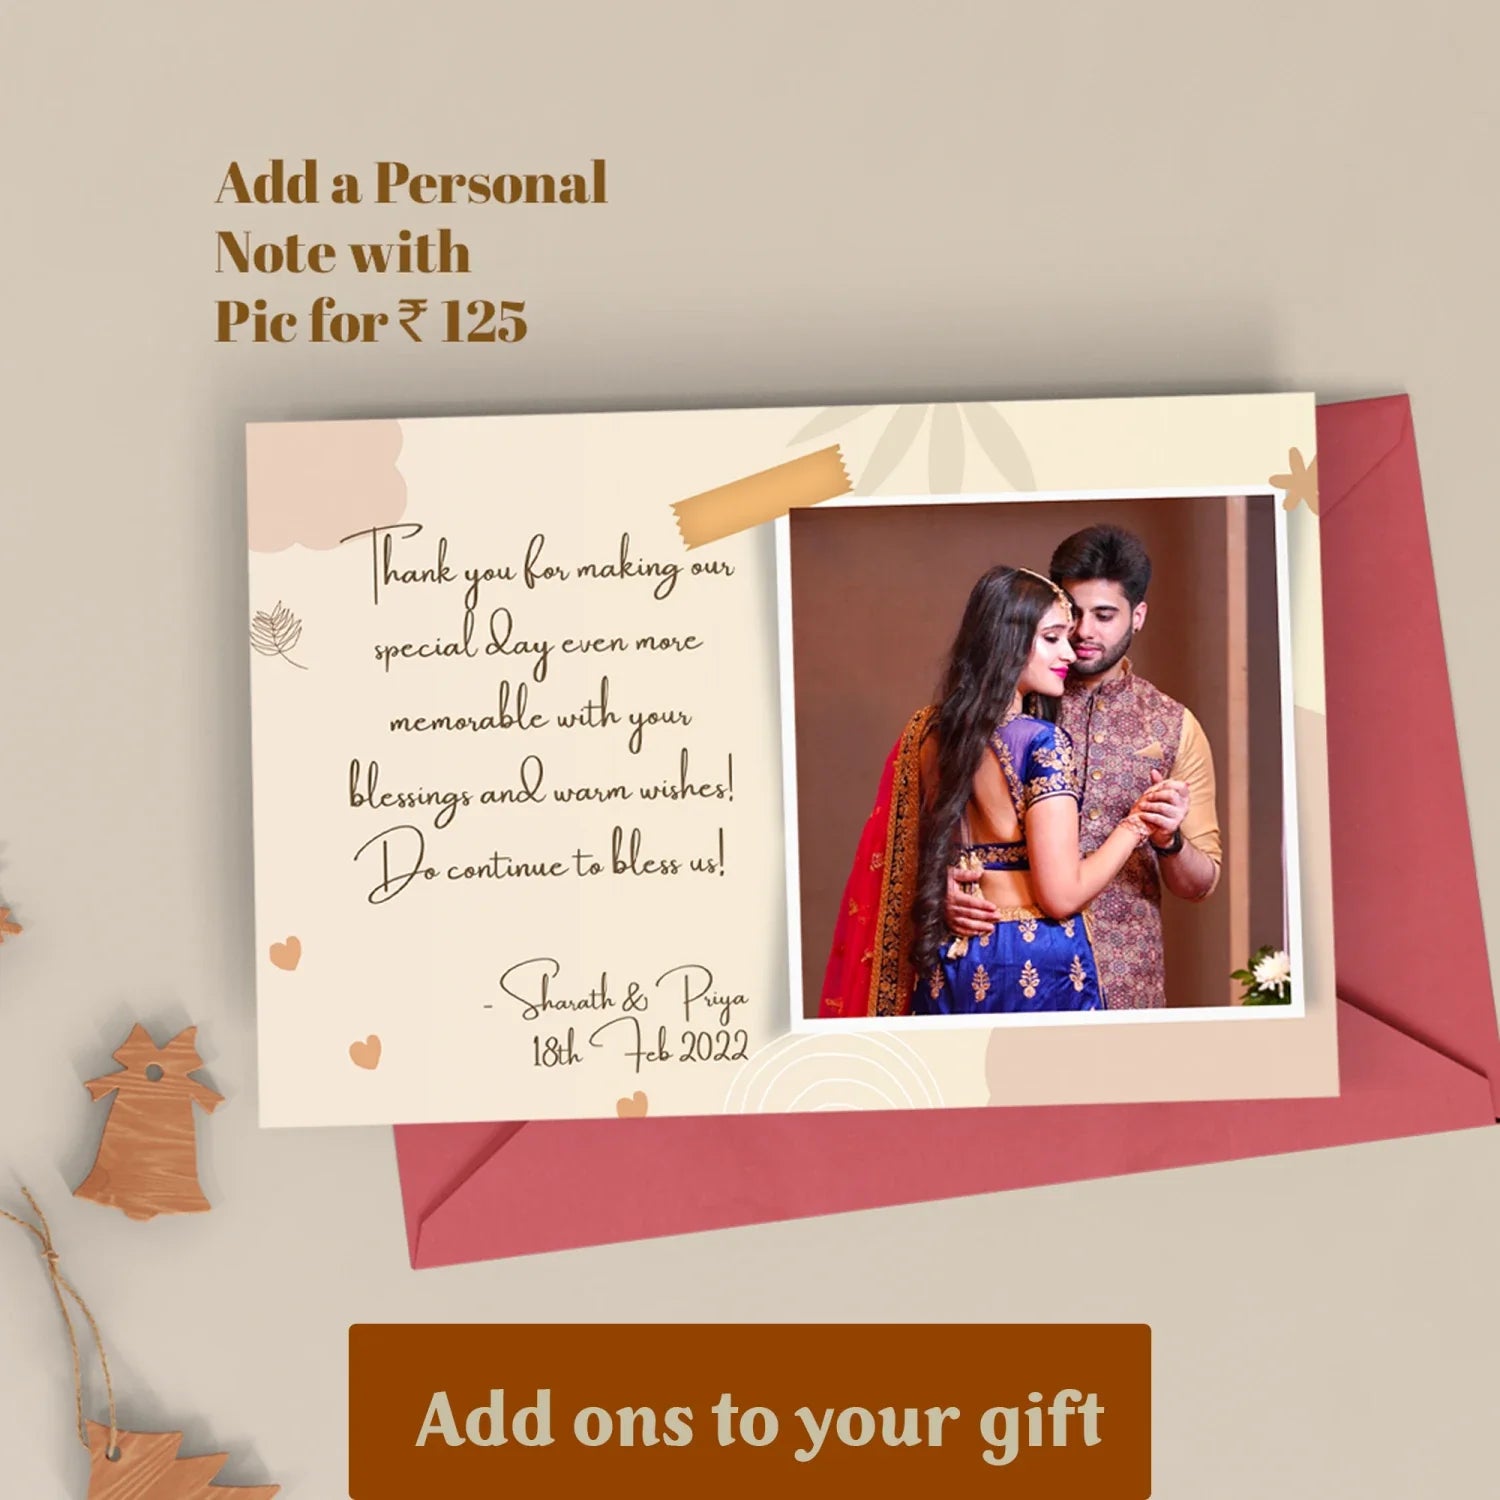 "Add an element of unknown and surprise to your personalized gifts and make it spellbinding with a fine finish,.   "